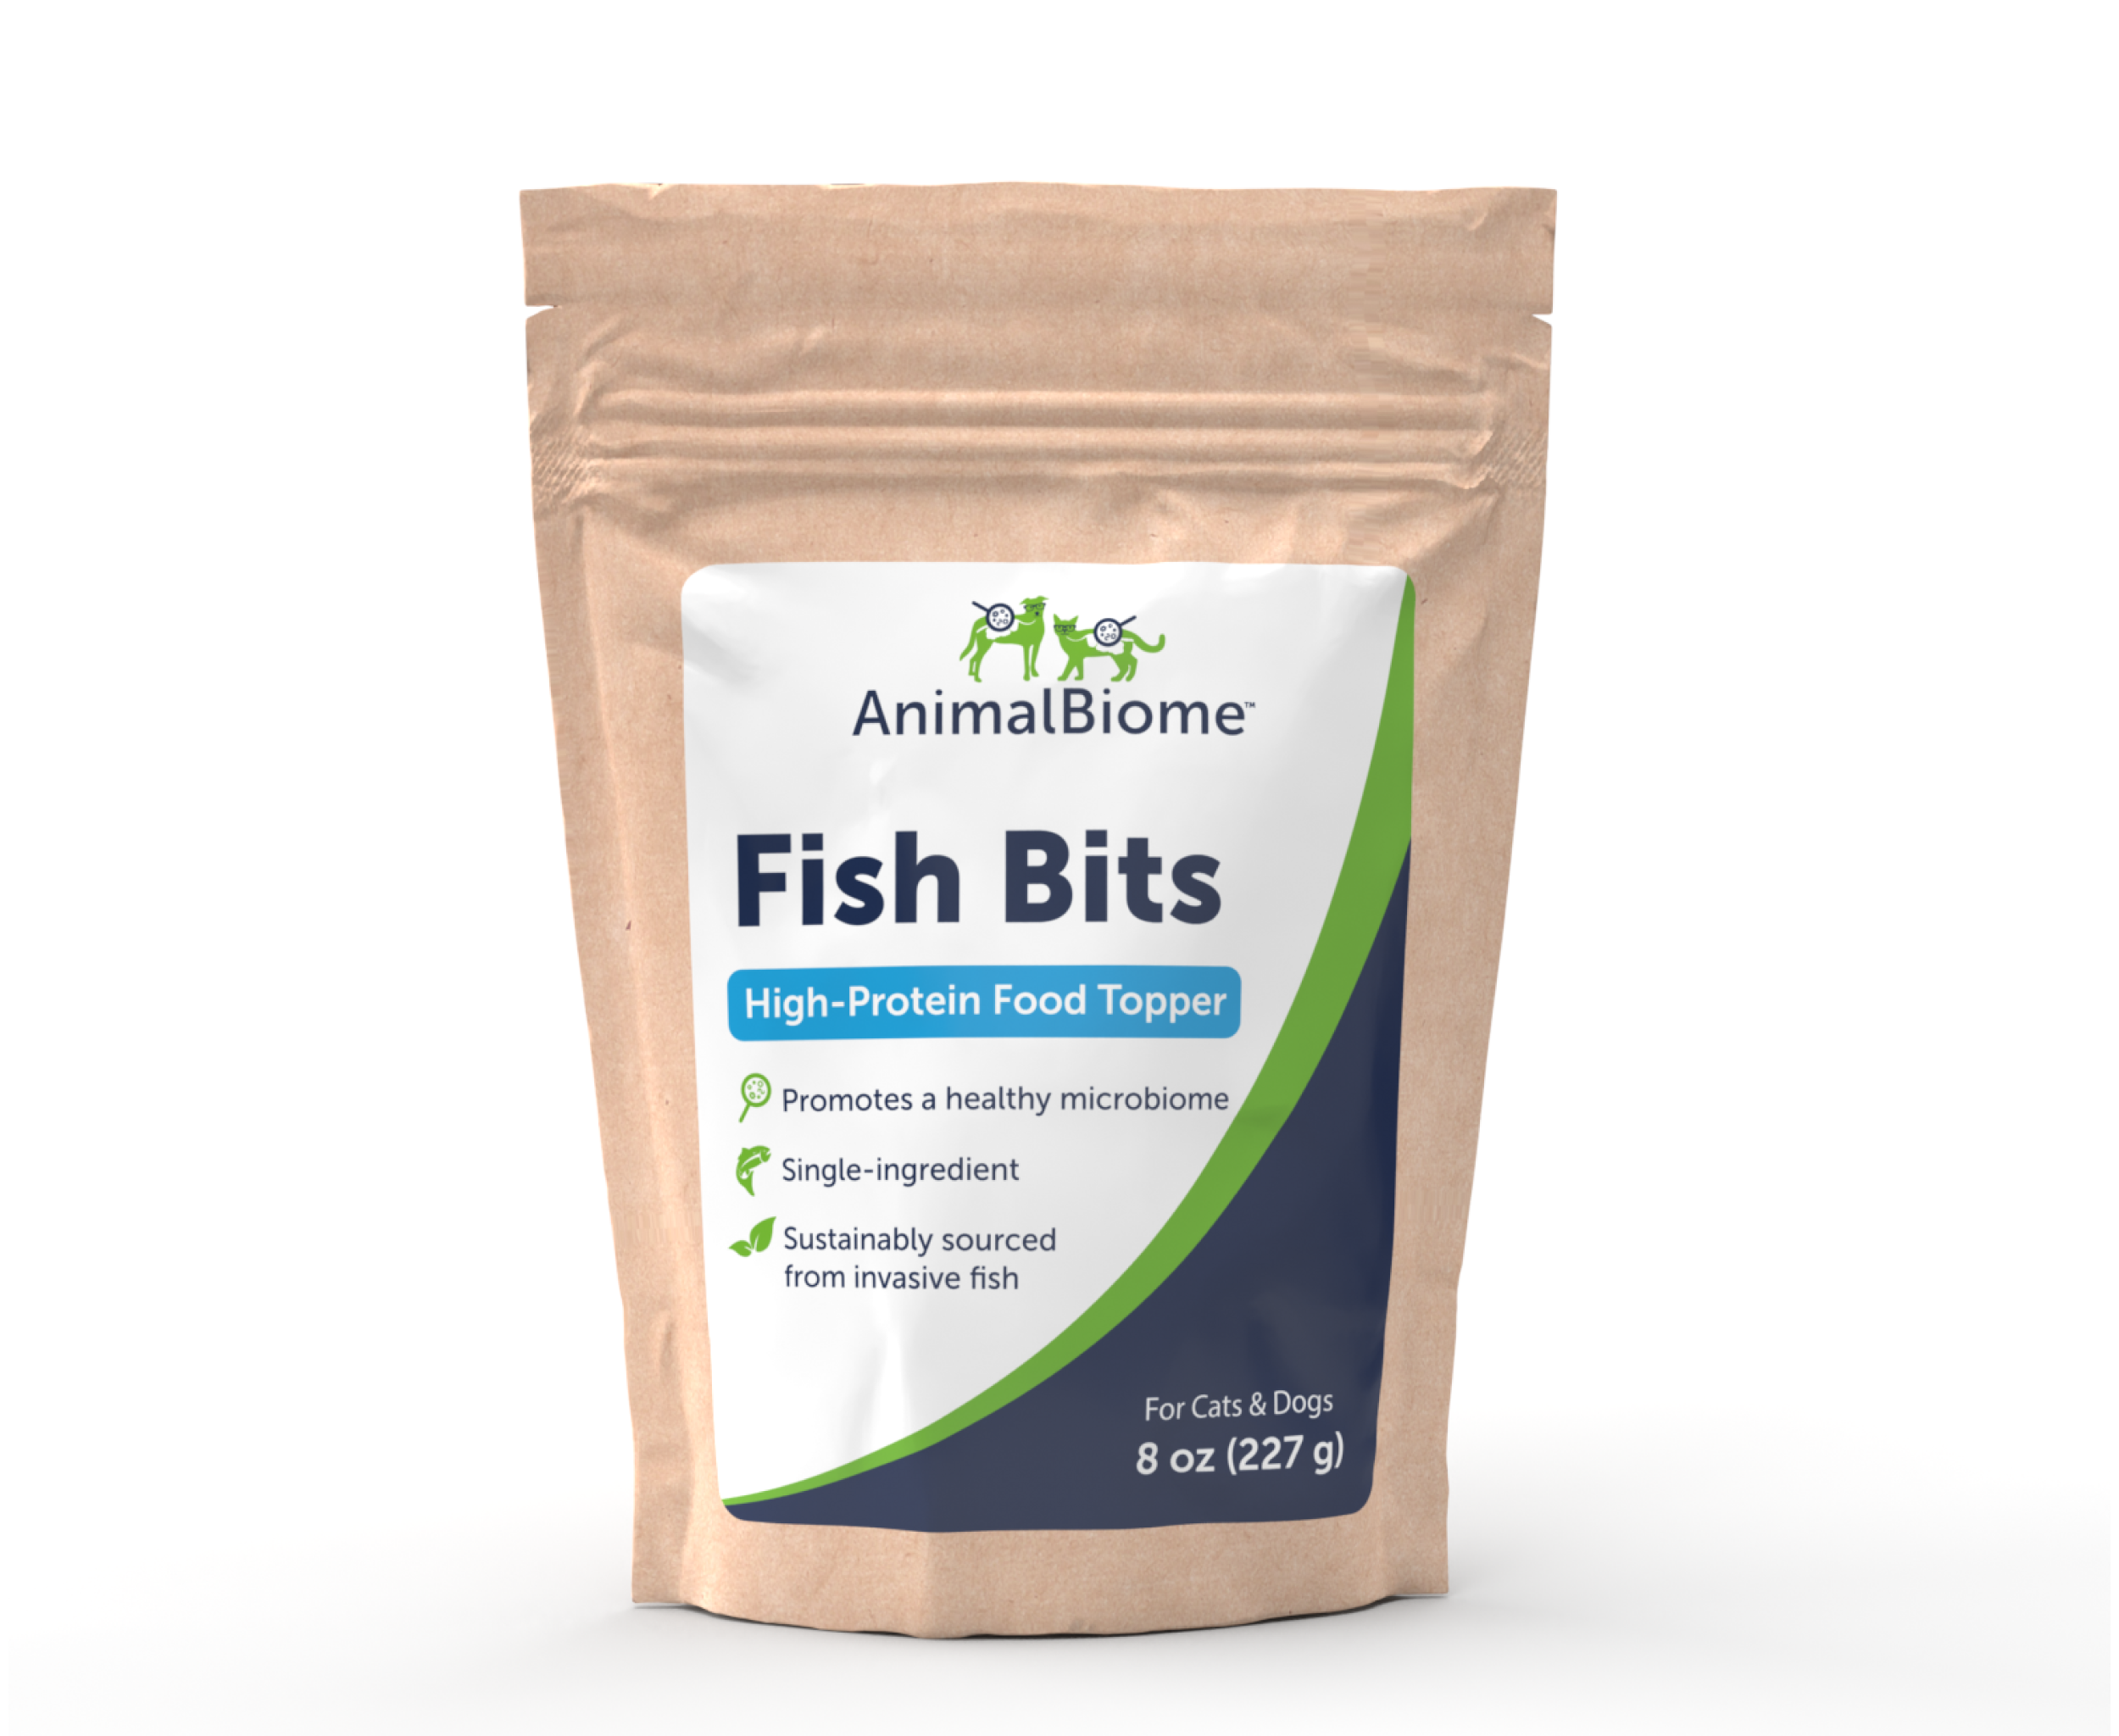 AnimalBiome® Fish Bits High-Protein Food Topper